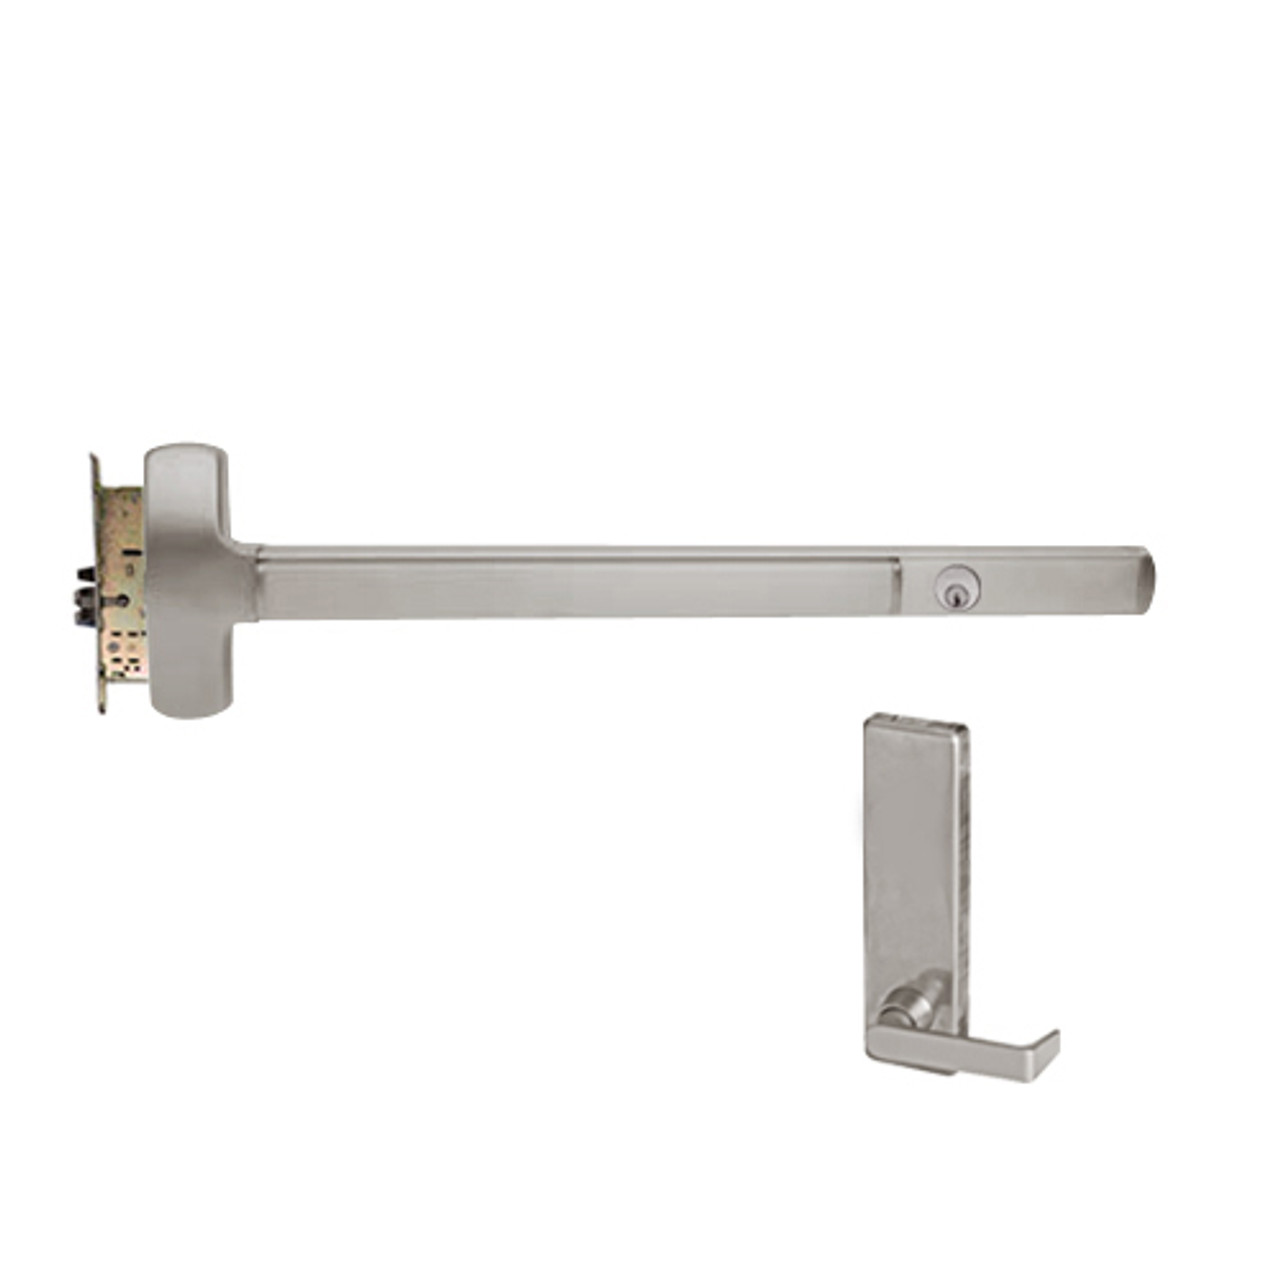 CD25-M-L-BE-DANE-US32D-3-RHR Falcon Exit Device in Satin Stainless Steel